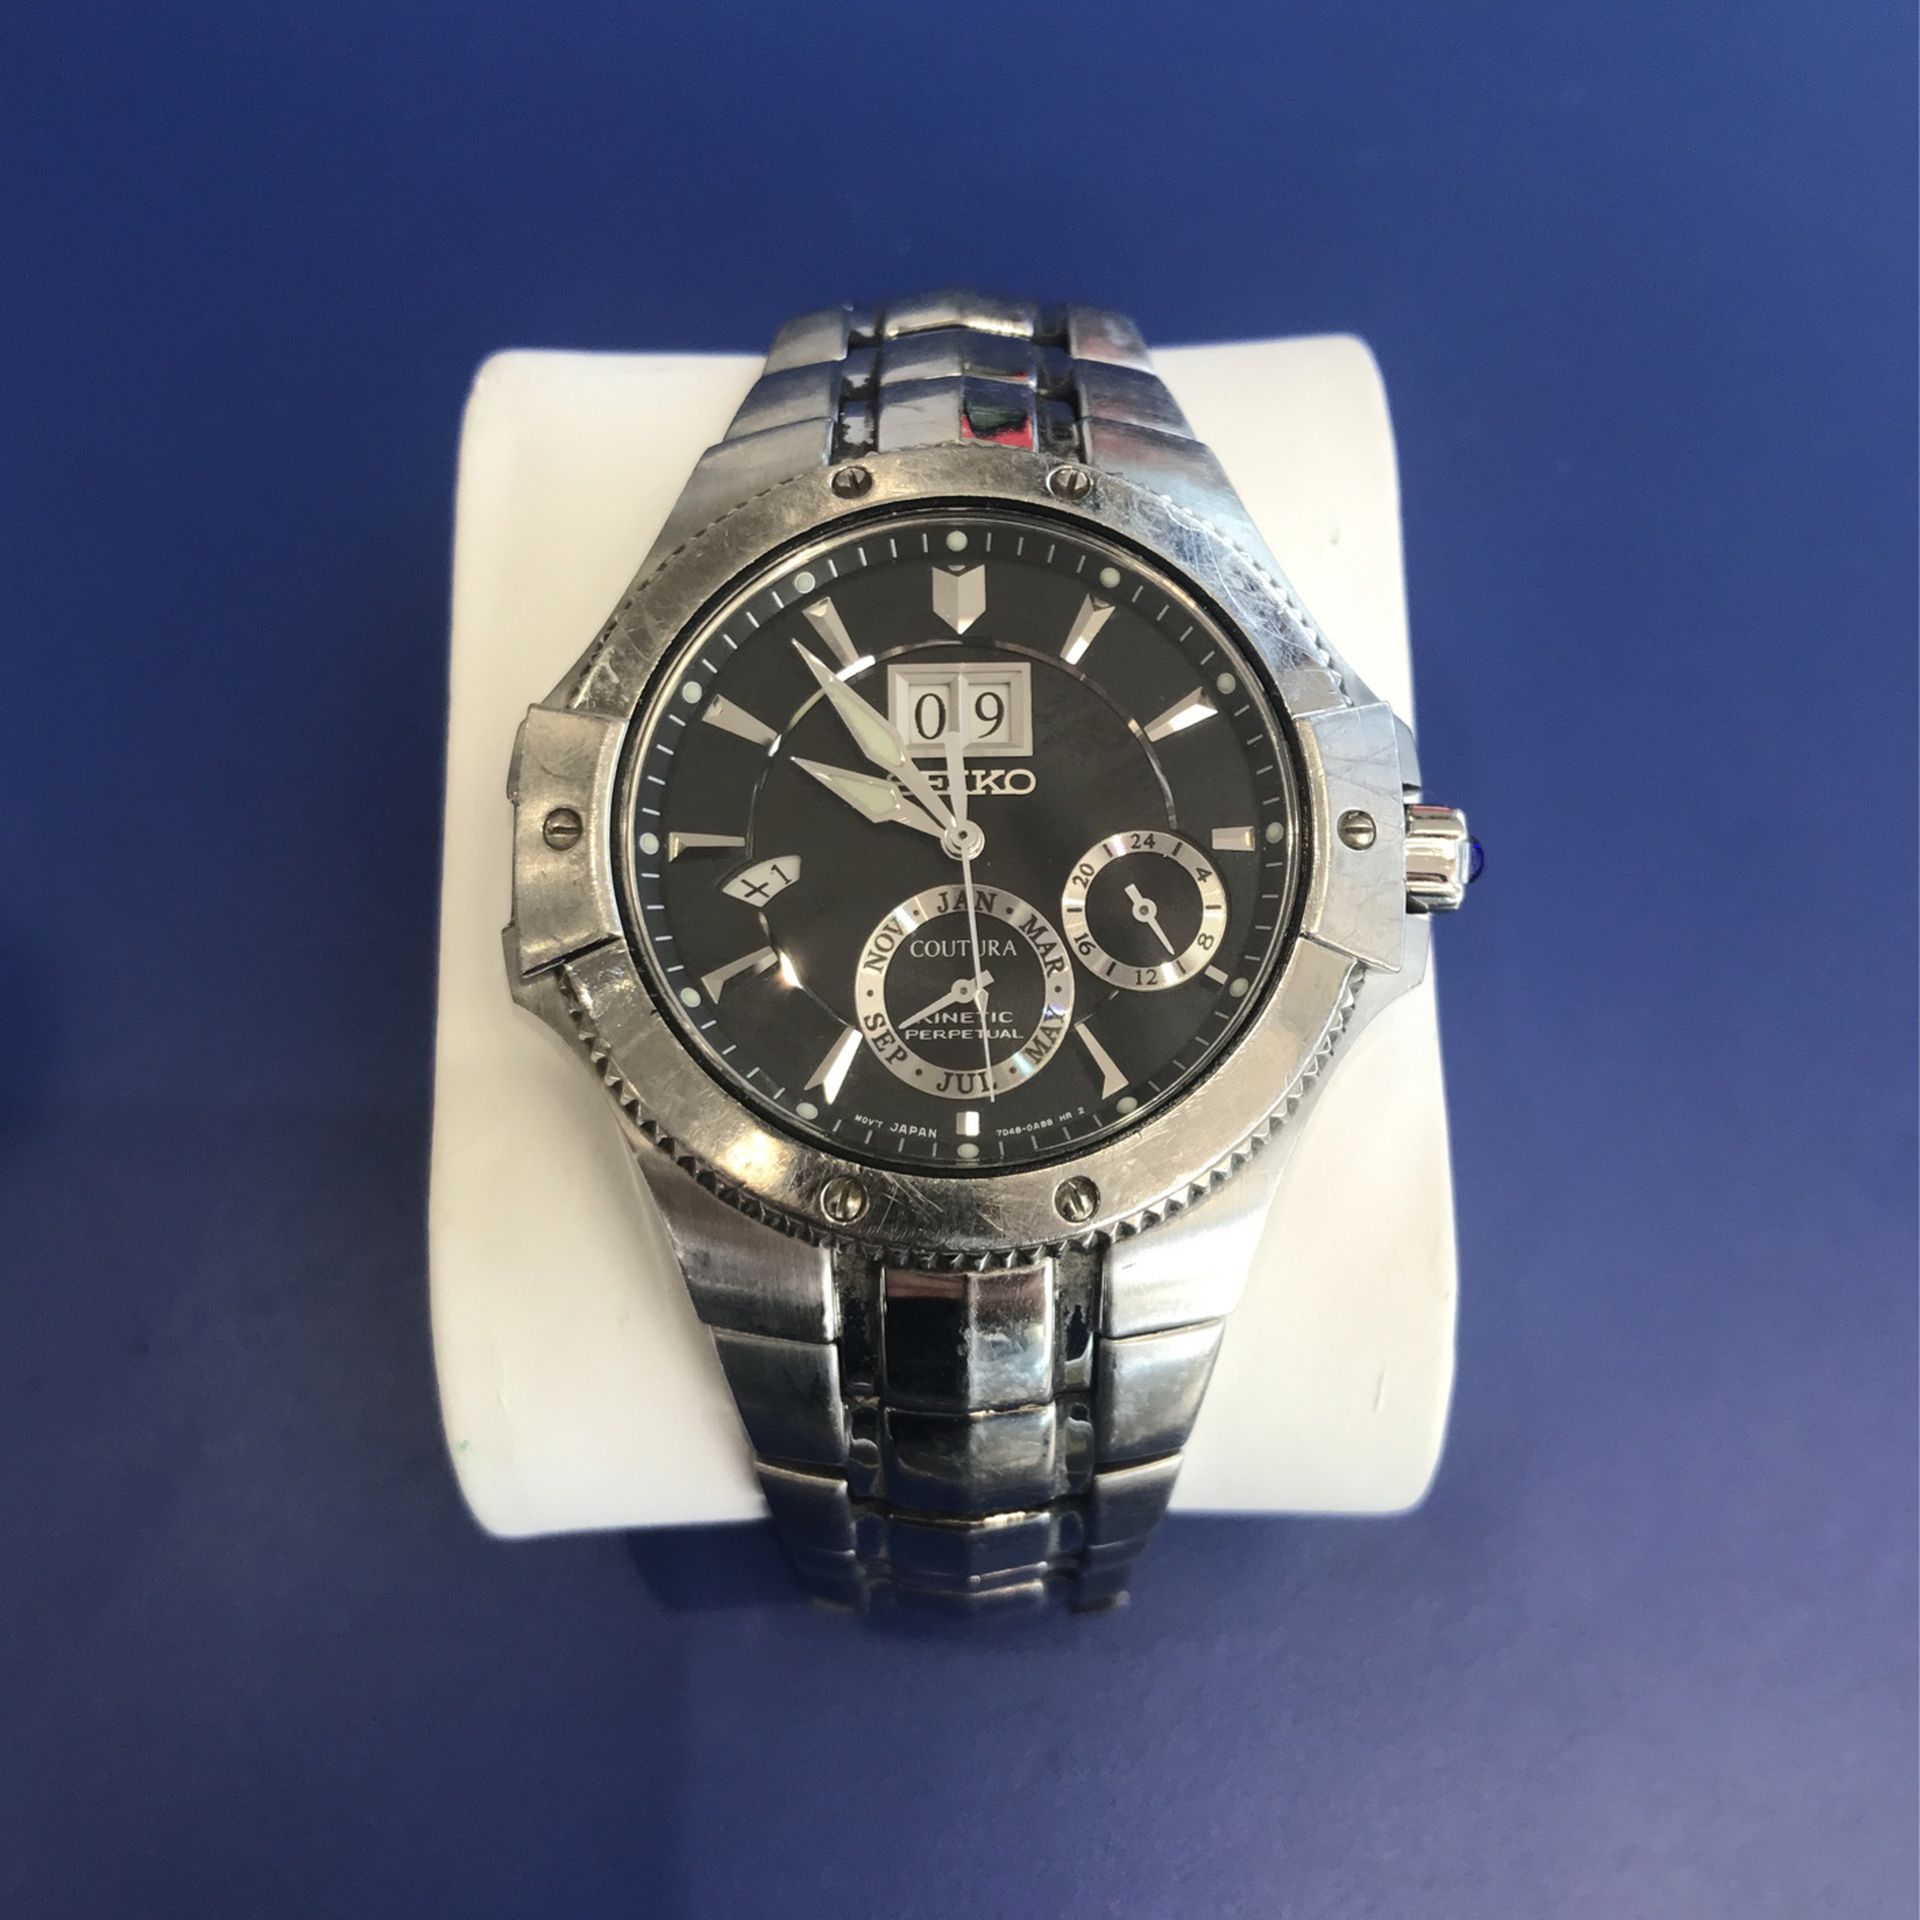 SEIKO  COUTURA  7D48-0AB0 SAPPHIRE CRYSTAL WACTH  ( Plus Tax ) $200 ASK 4 FRANKY GOOGLE US 